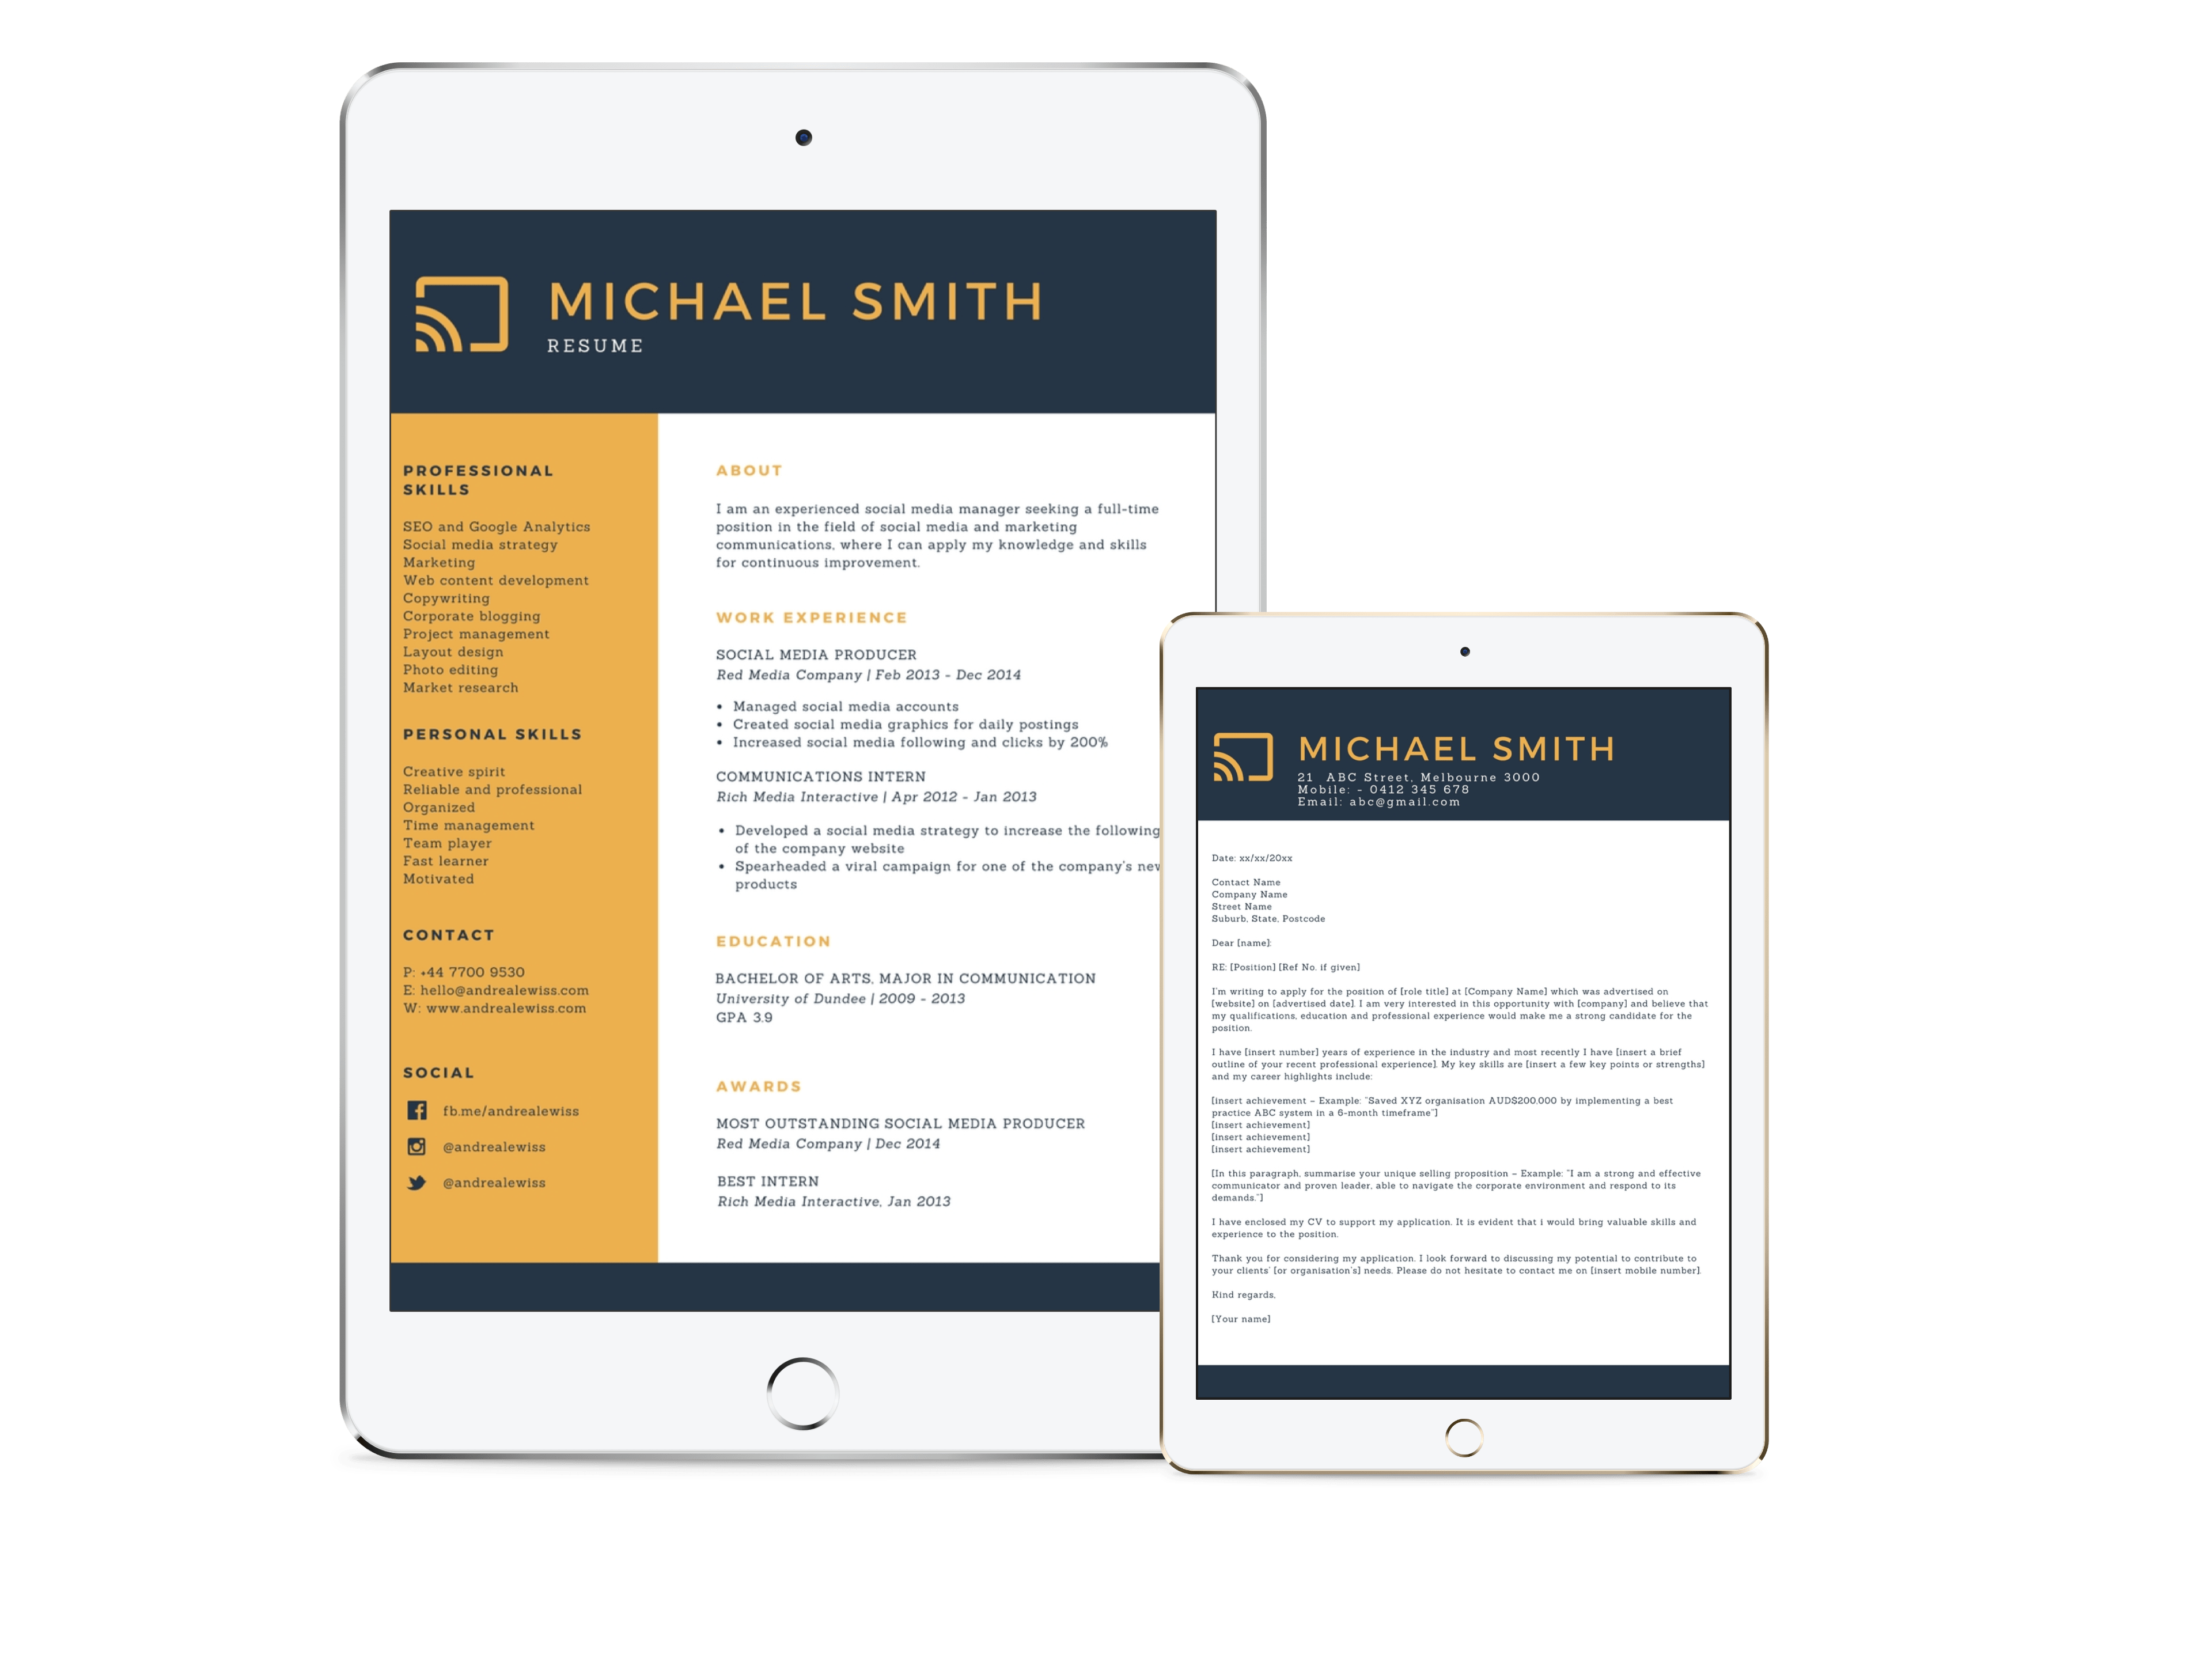 Resume and Cover letter templates